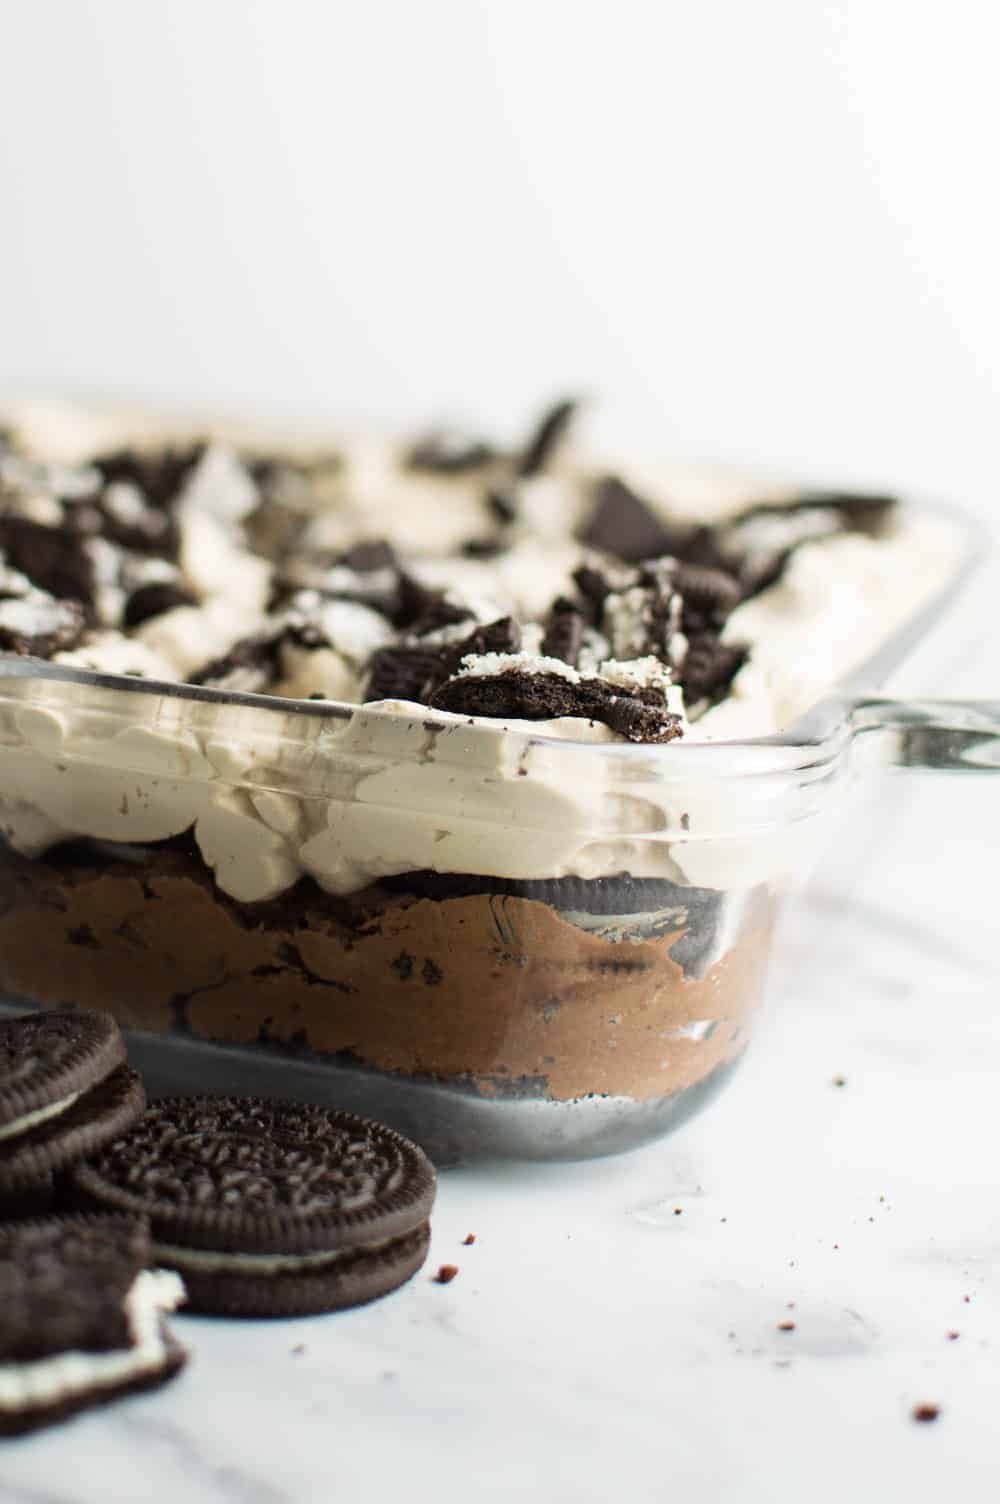 Clear casserole dish showing layers of Oreo dessert